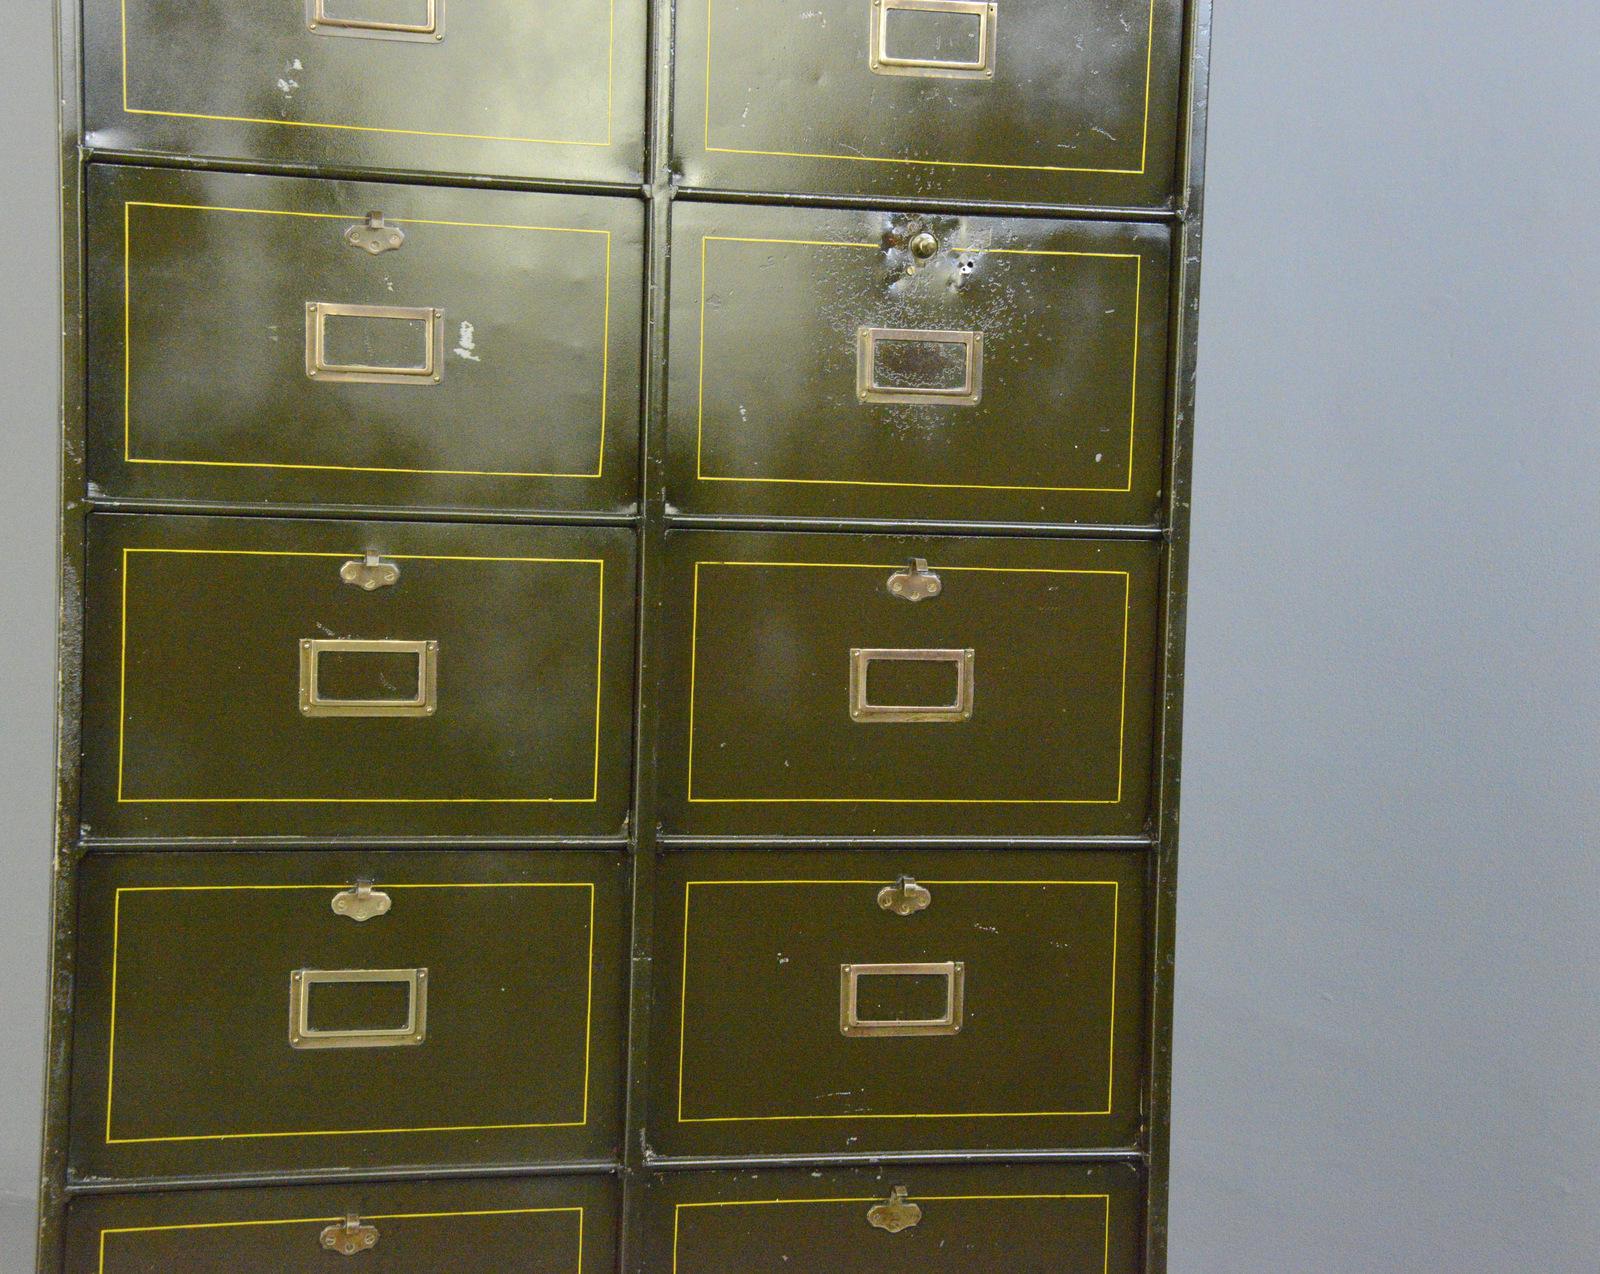 Early 20th Century Industrial Pigeon Hole Cabinet by Morgan Strasbourg Circa 1910